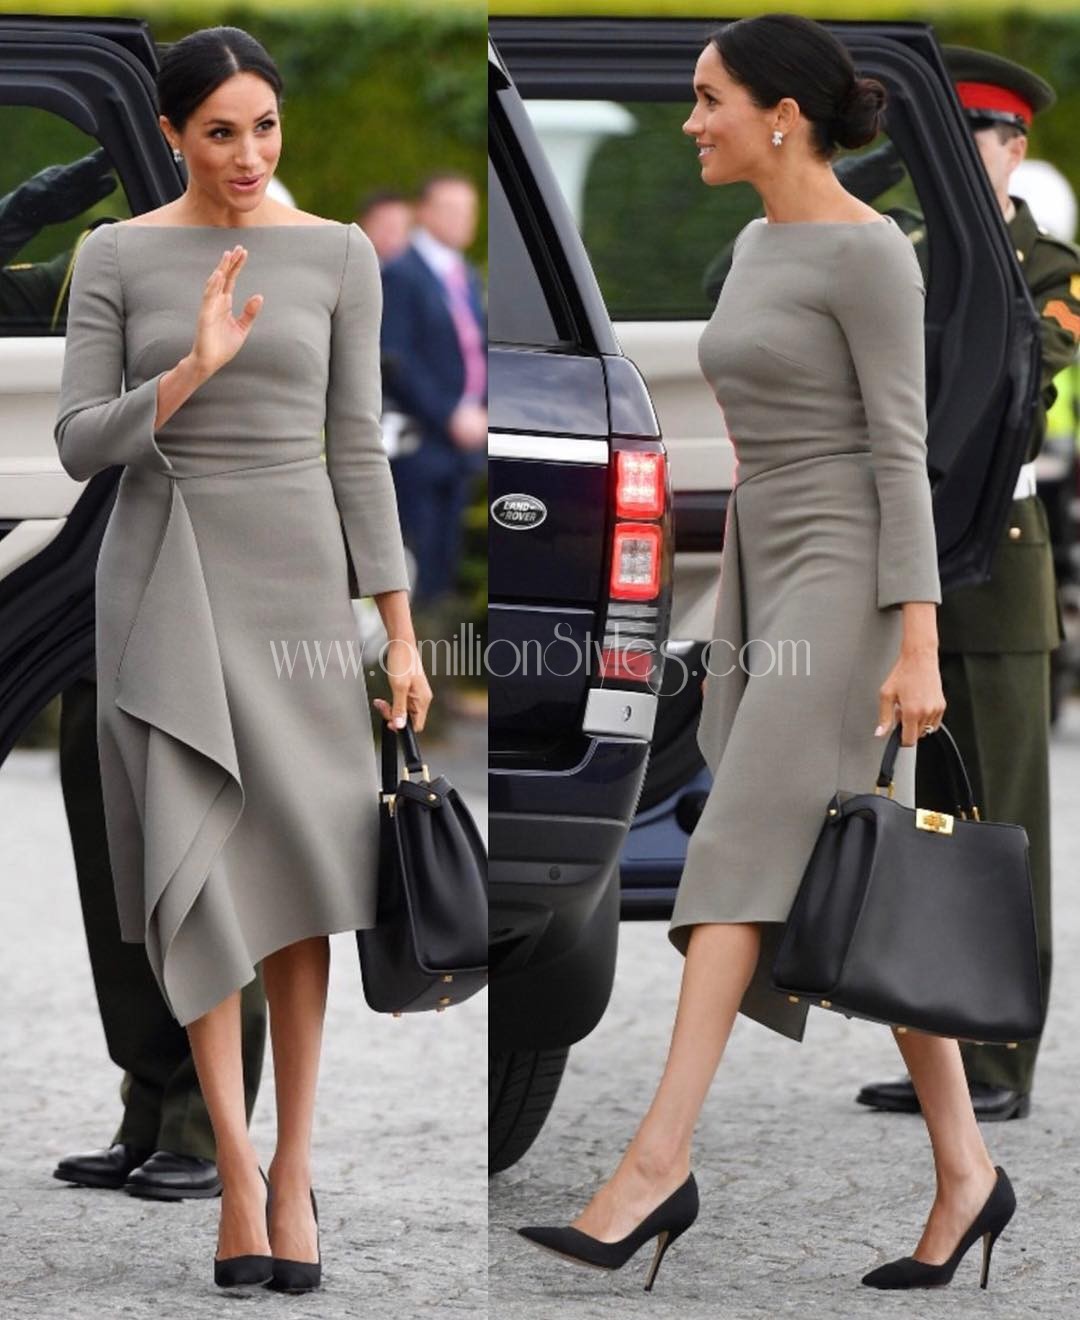 The New Duchess Of Sussex Meghan Markle Proves To Us She Is The Ultimate Style Star